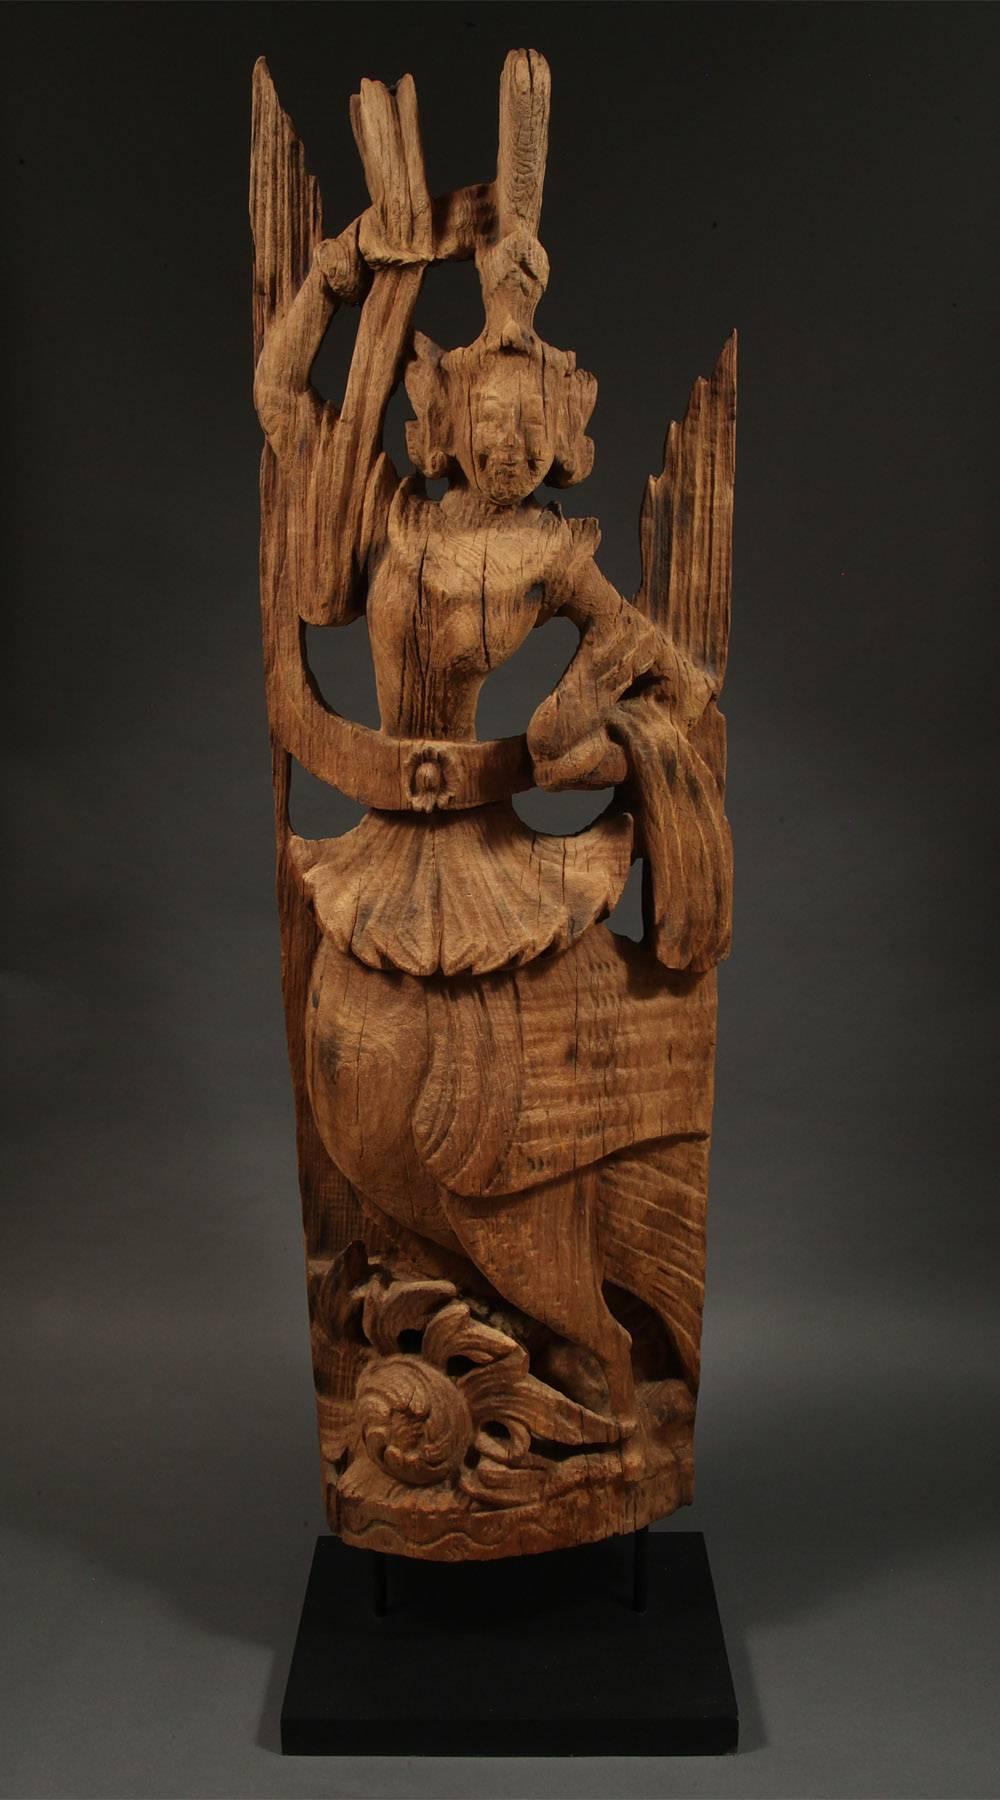 Early 20th century carved wood Kinnari (female) figure, Burma.

The magical half-human, half-bird figures likely came to Burma through Indian literature and the spread of Buddhism. They are known for their physical beauty, glorious plumage, grace